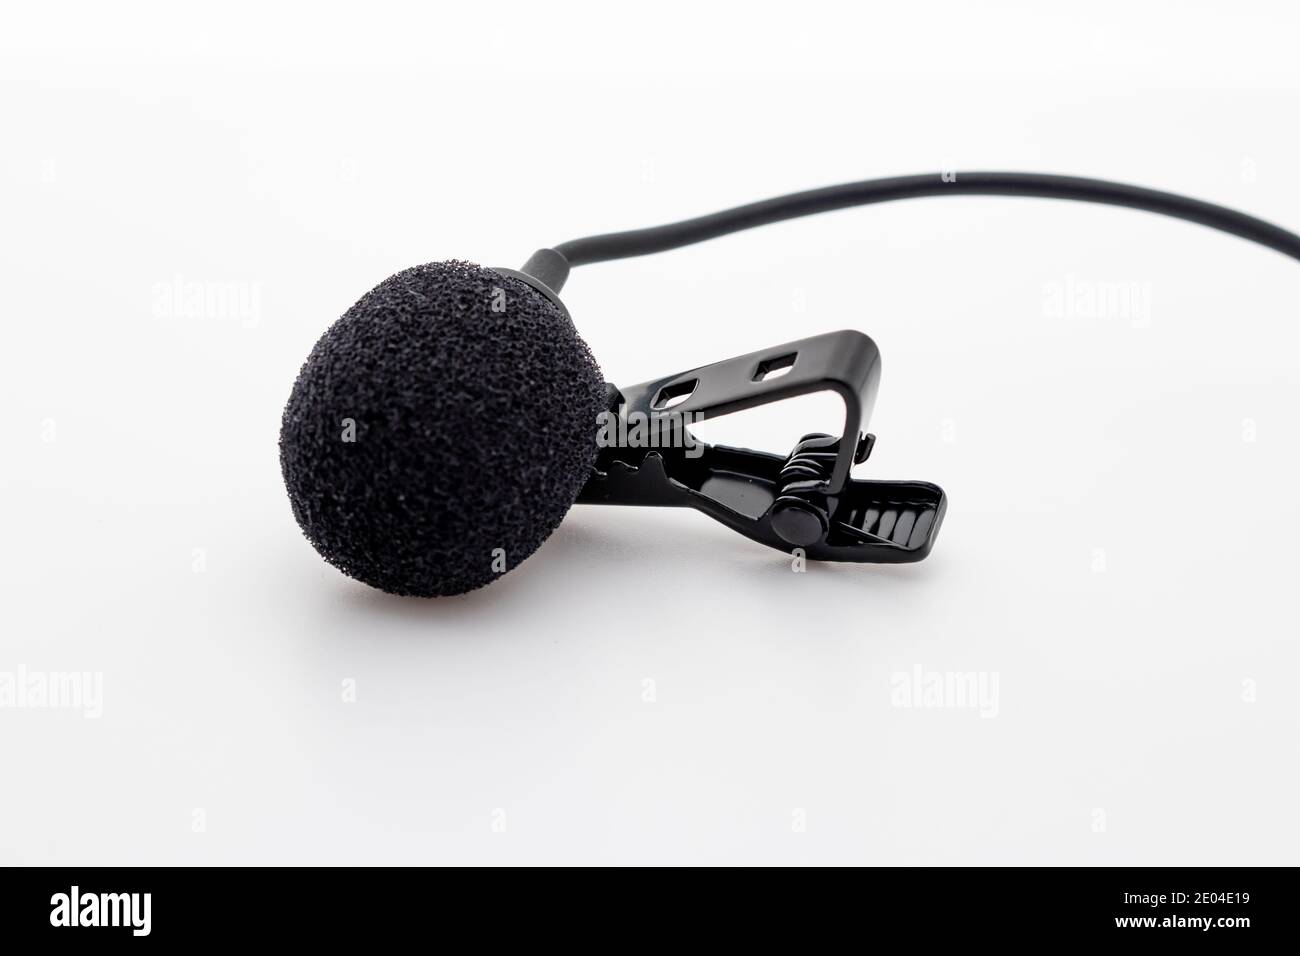 Lavalier or lapel microphone on a surface, very close-up. The details of the grip clip or bra and the sponge against the wind are visible. Stock Photo